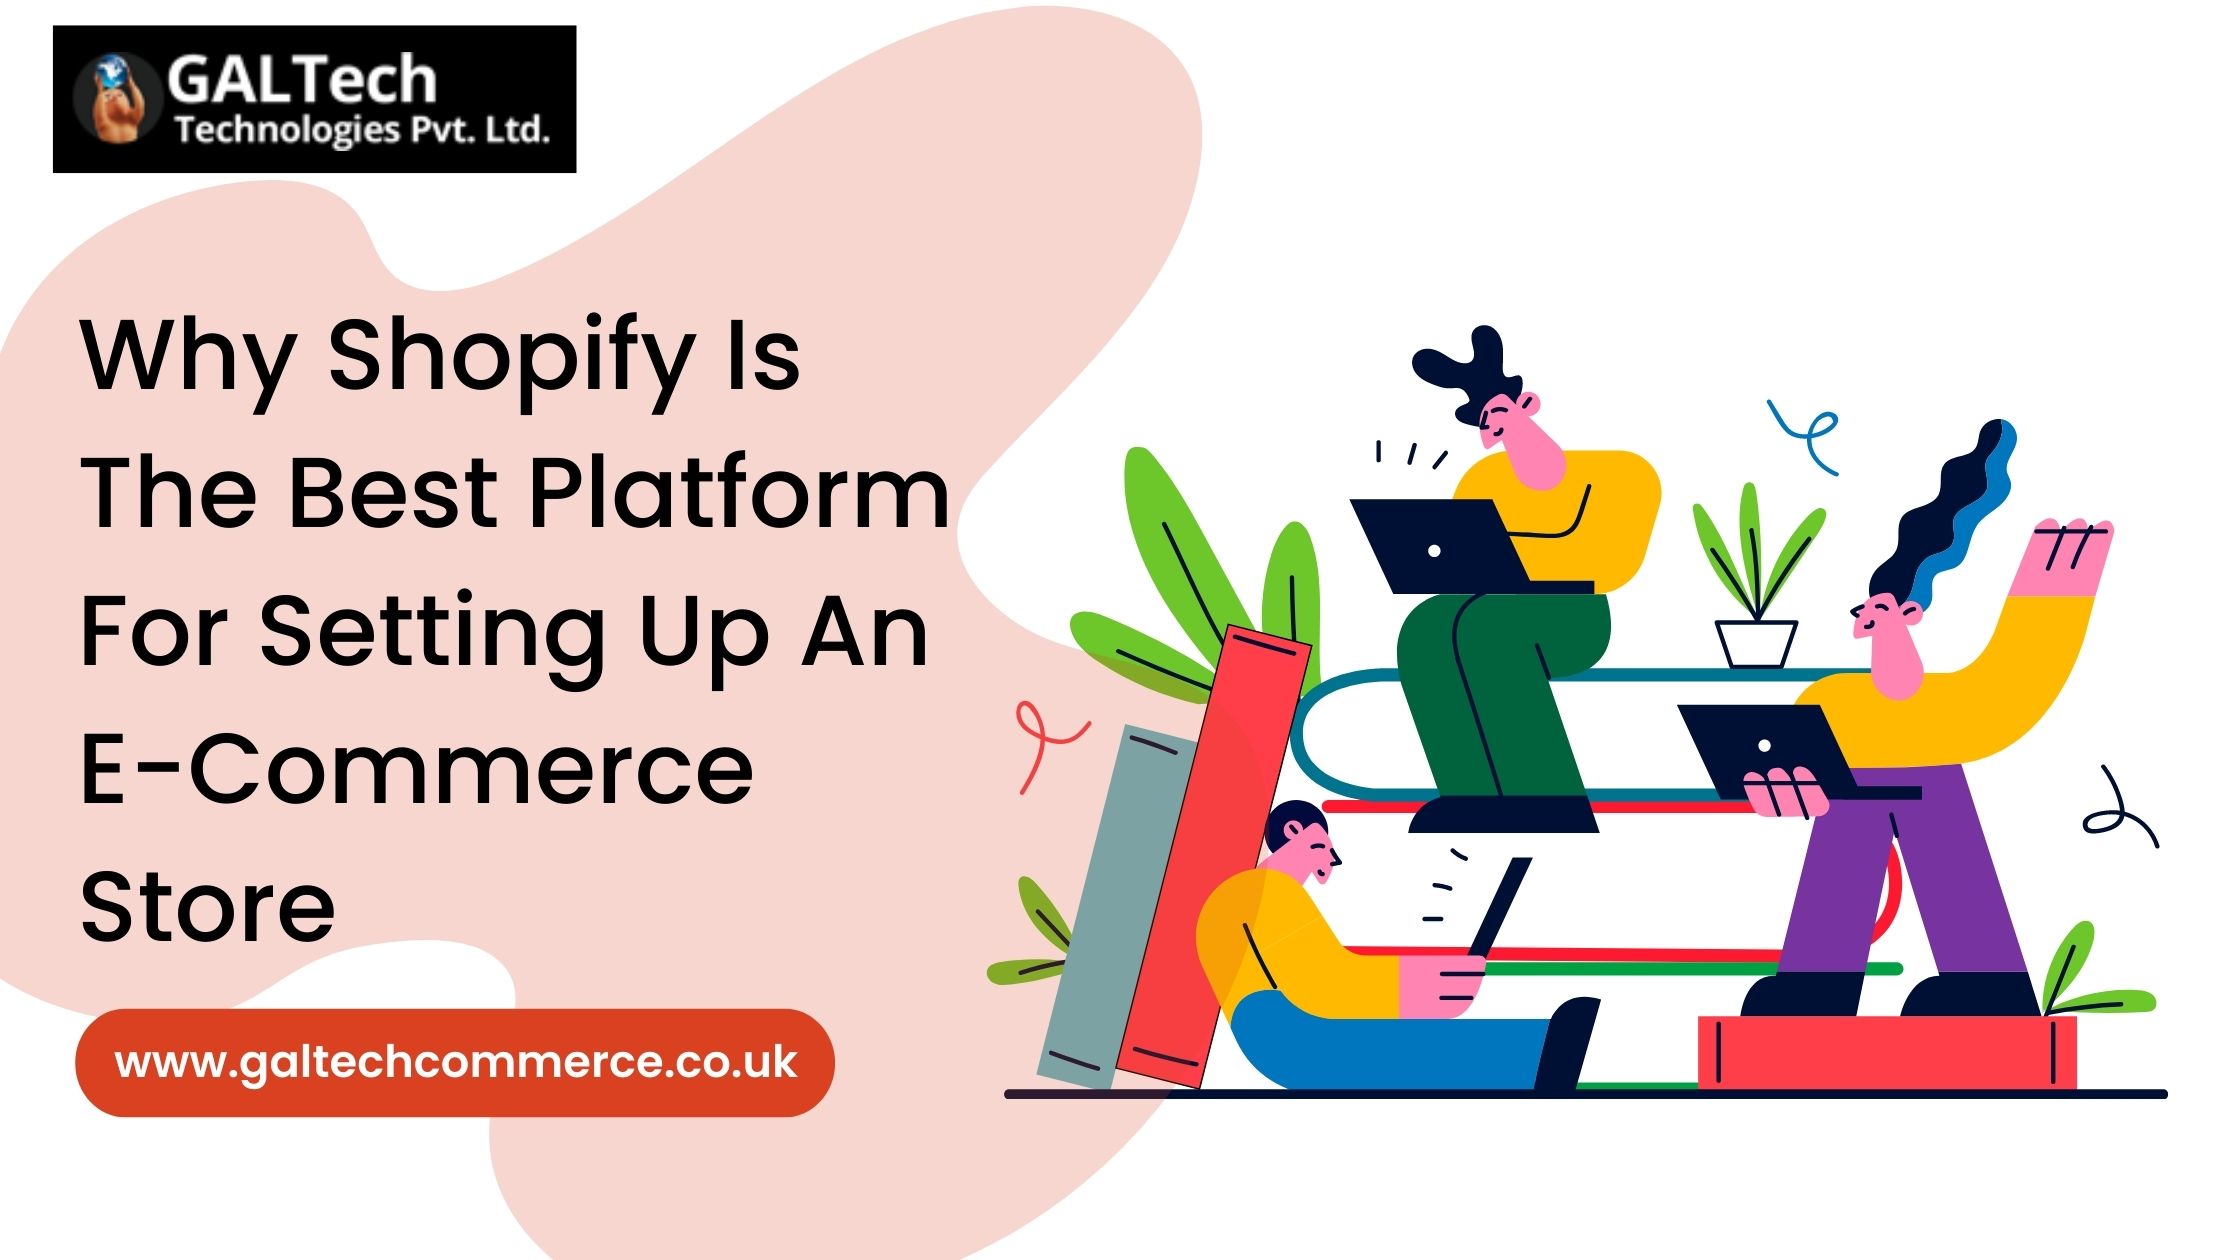 6 Reasons Why Shopify Is The Best Platform For Setting Up An E-Commerce Store